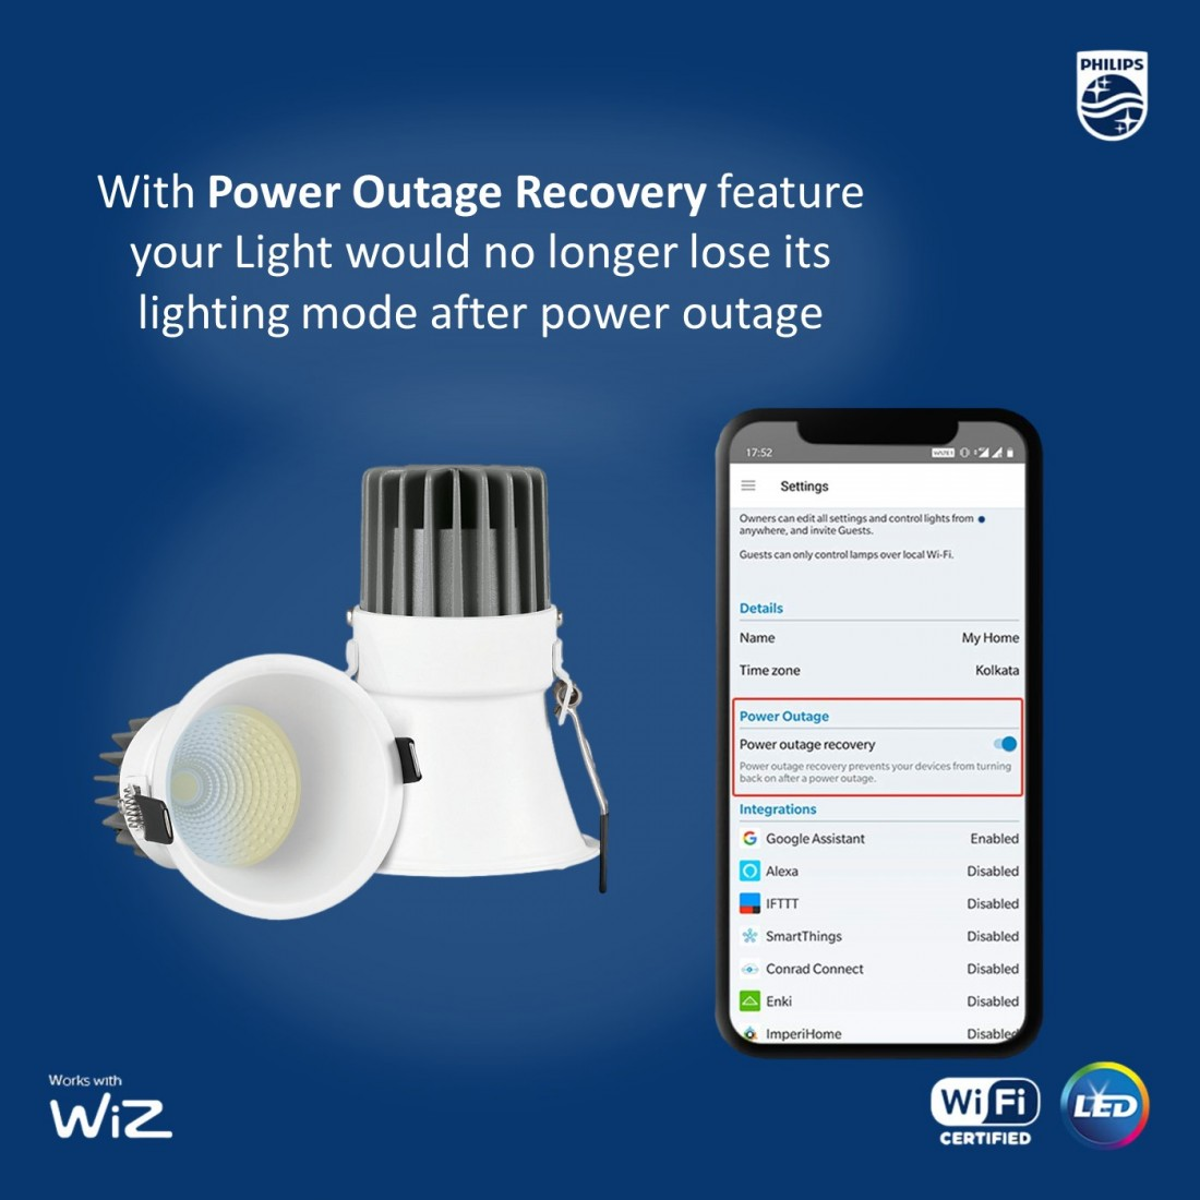 Philips Smart WiFi Thin Trim LED COB light (Wiz Connected)